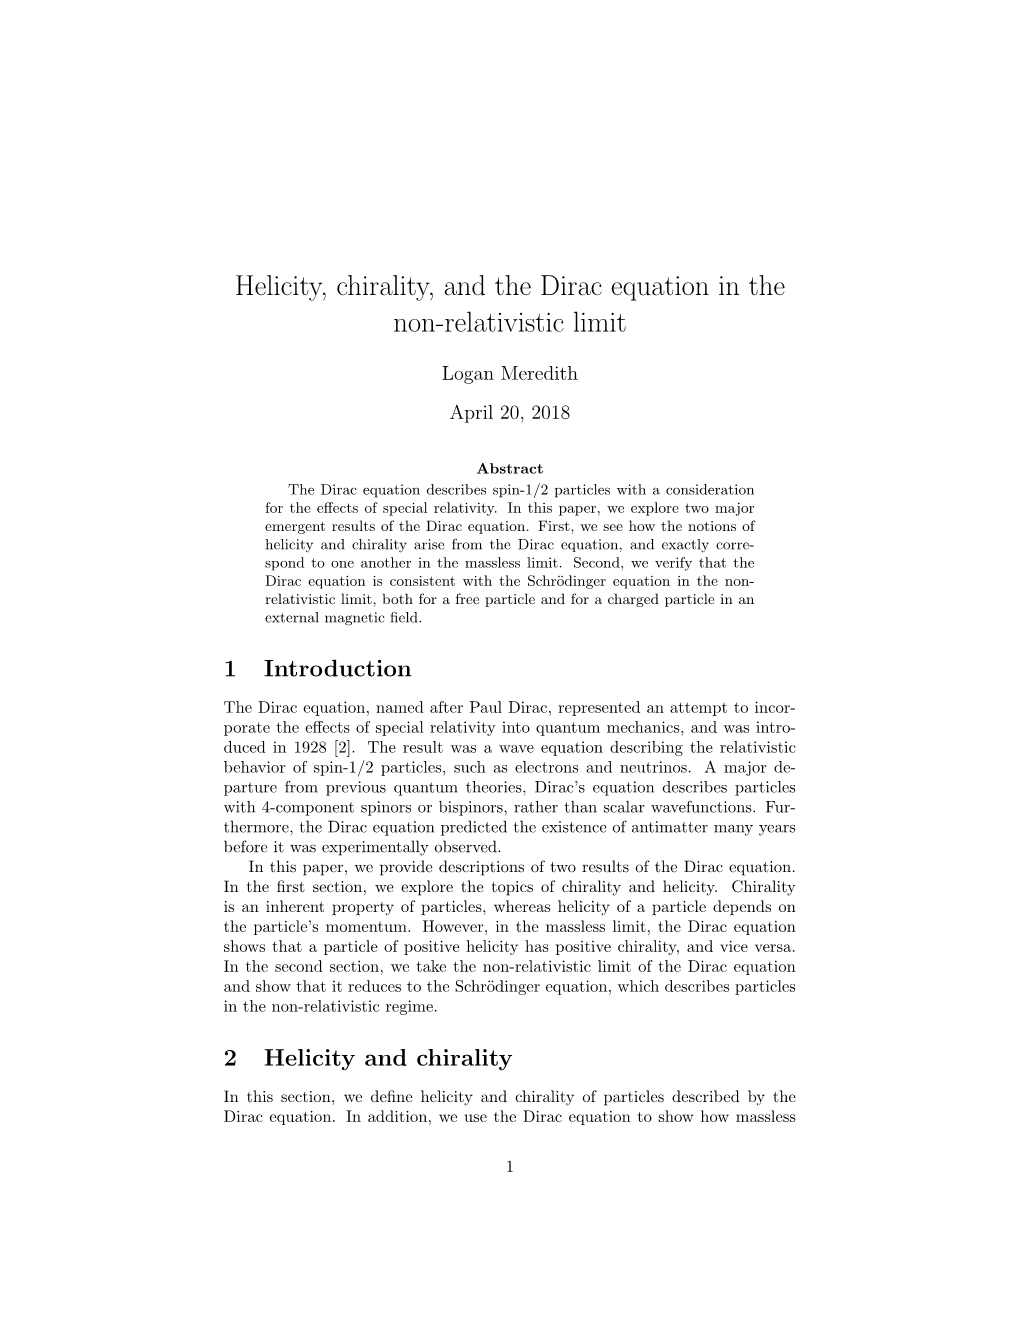 Helicity, Chirality, and the Dirac Equation in the Non-Relativistic Limit